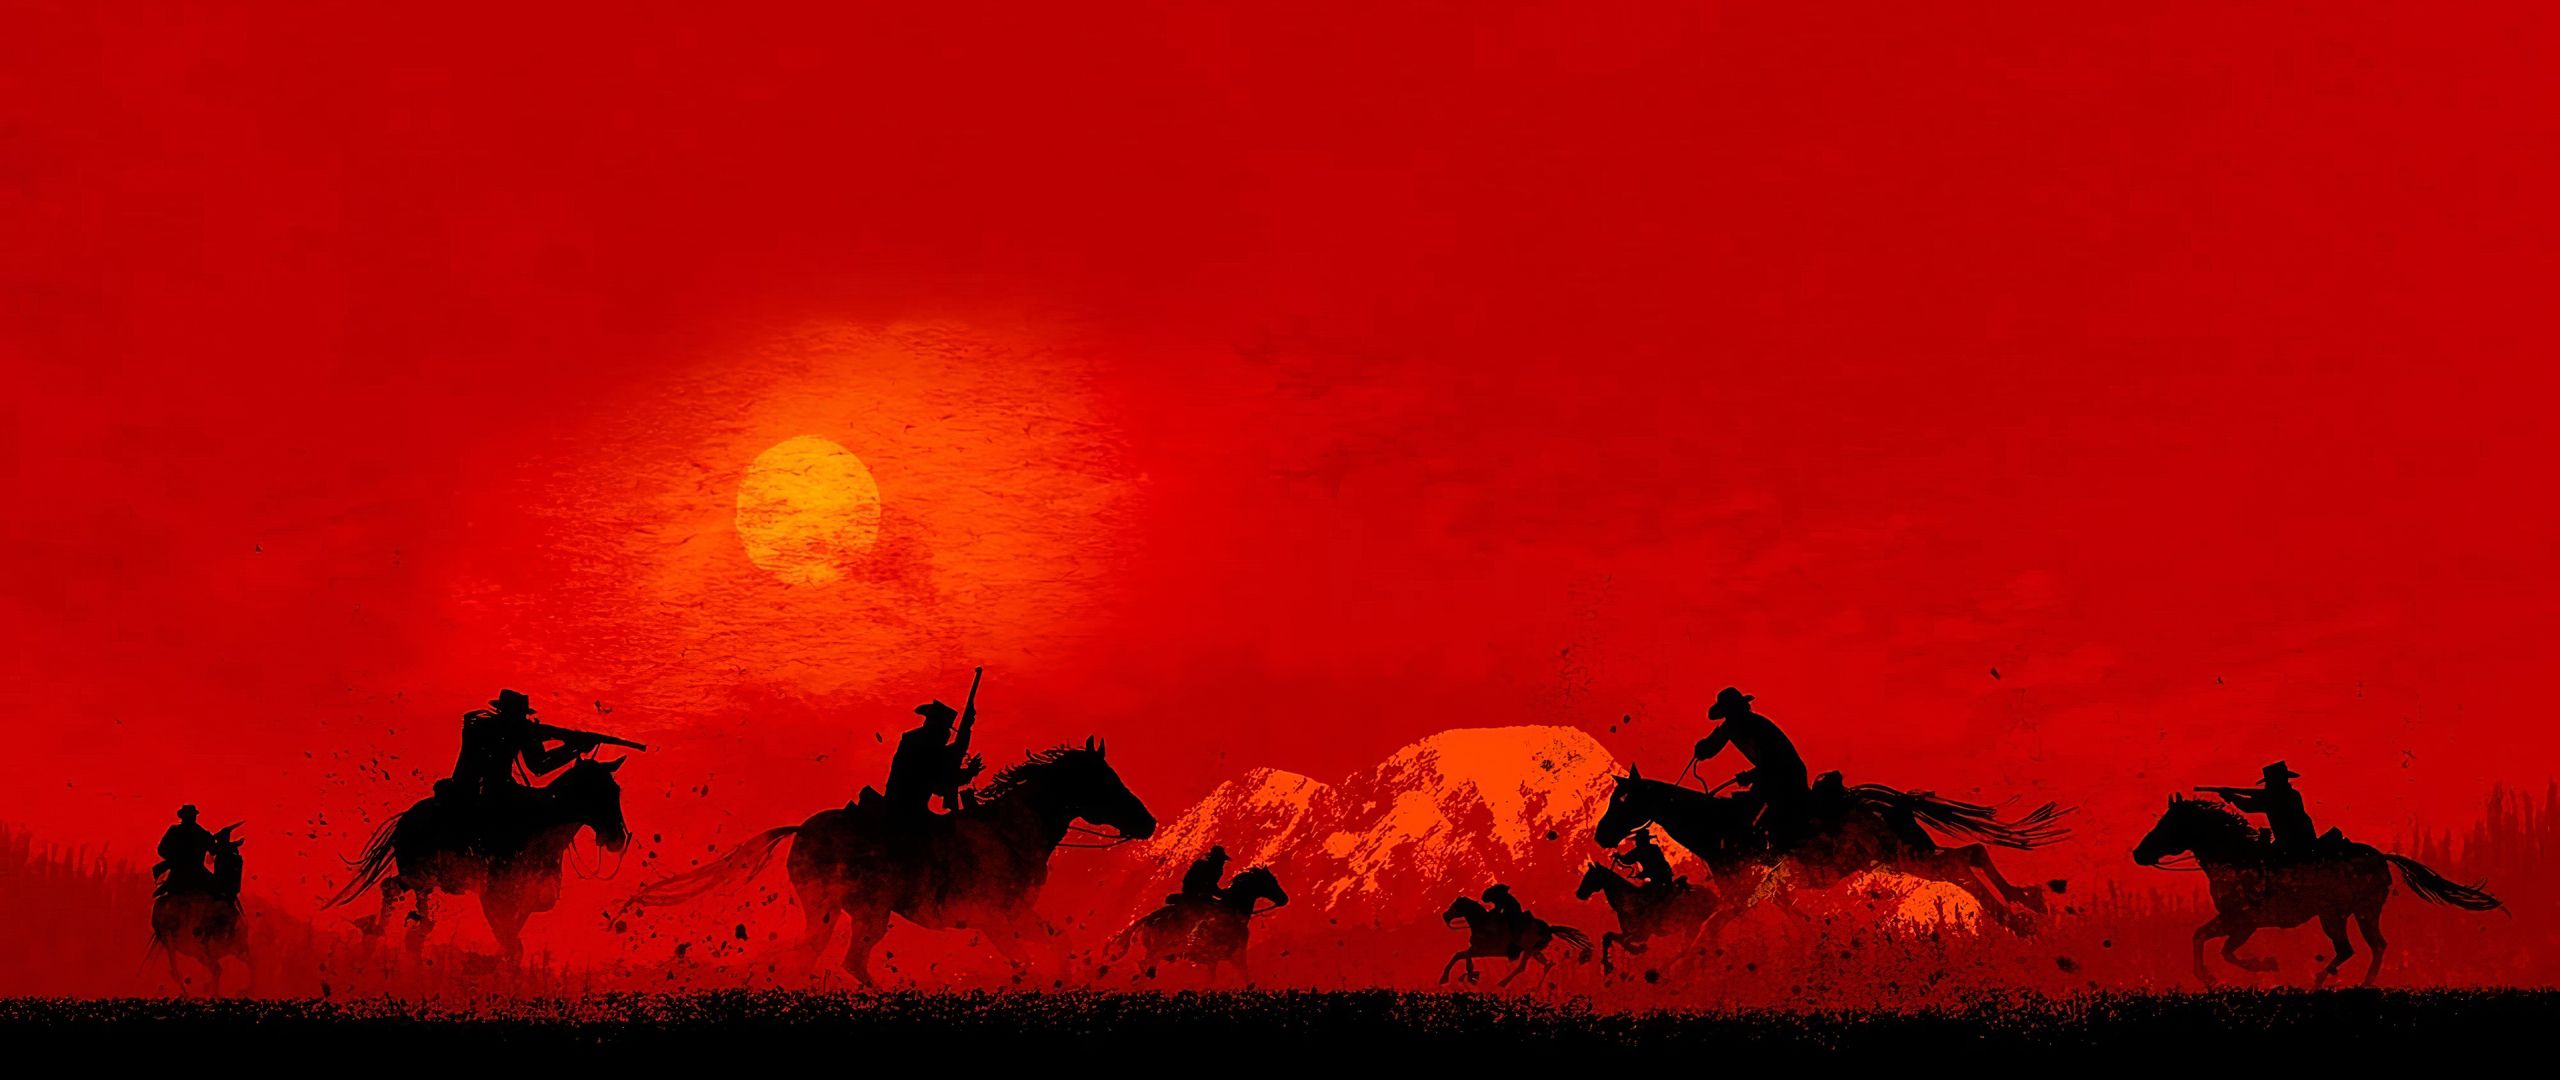 Red Dead Redemption 2 Game 2019 2560x1080 Resolution Wallpaper, HD Games 4K Wallpaper, Image, Photo and Background